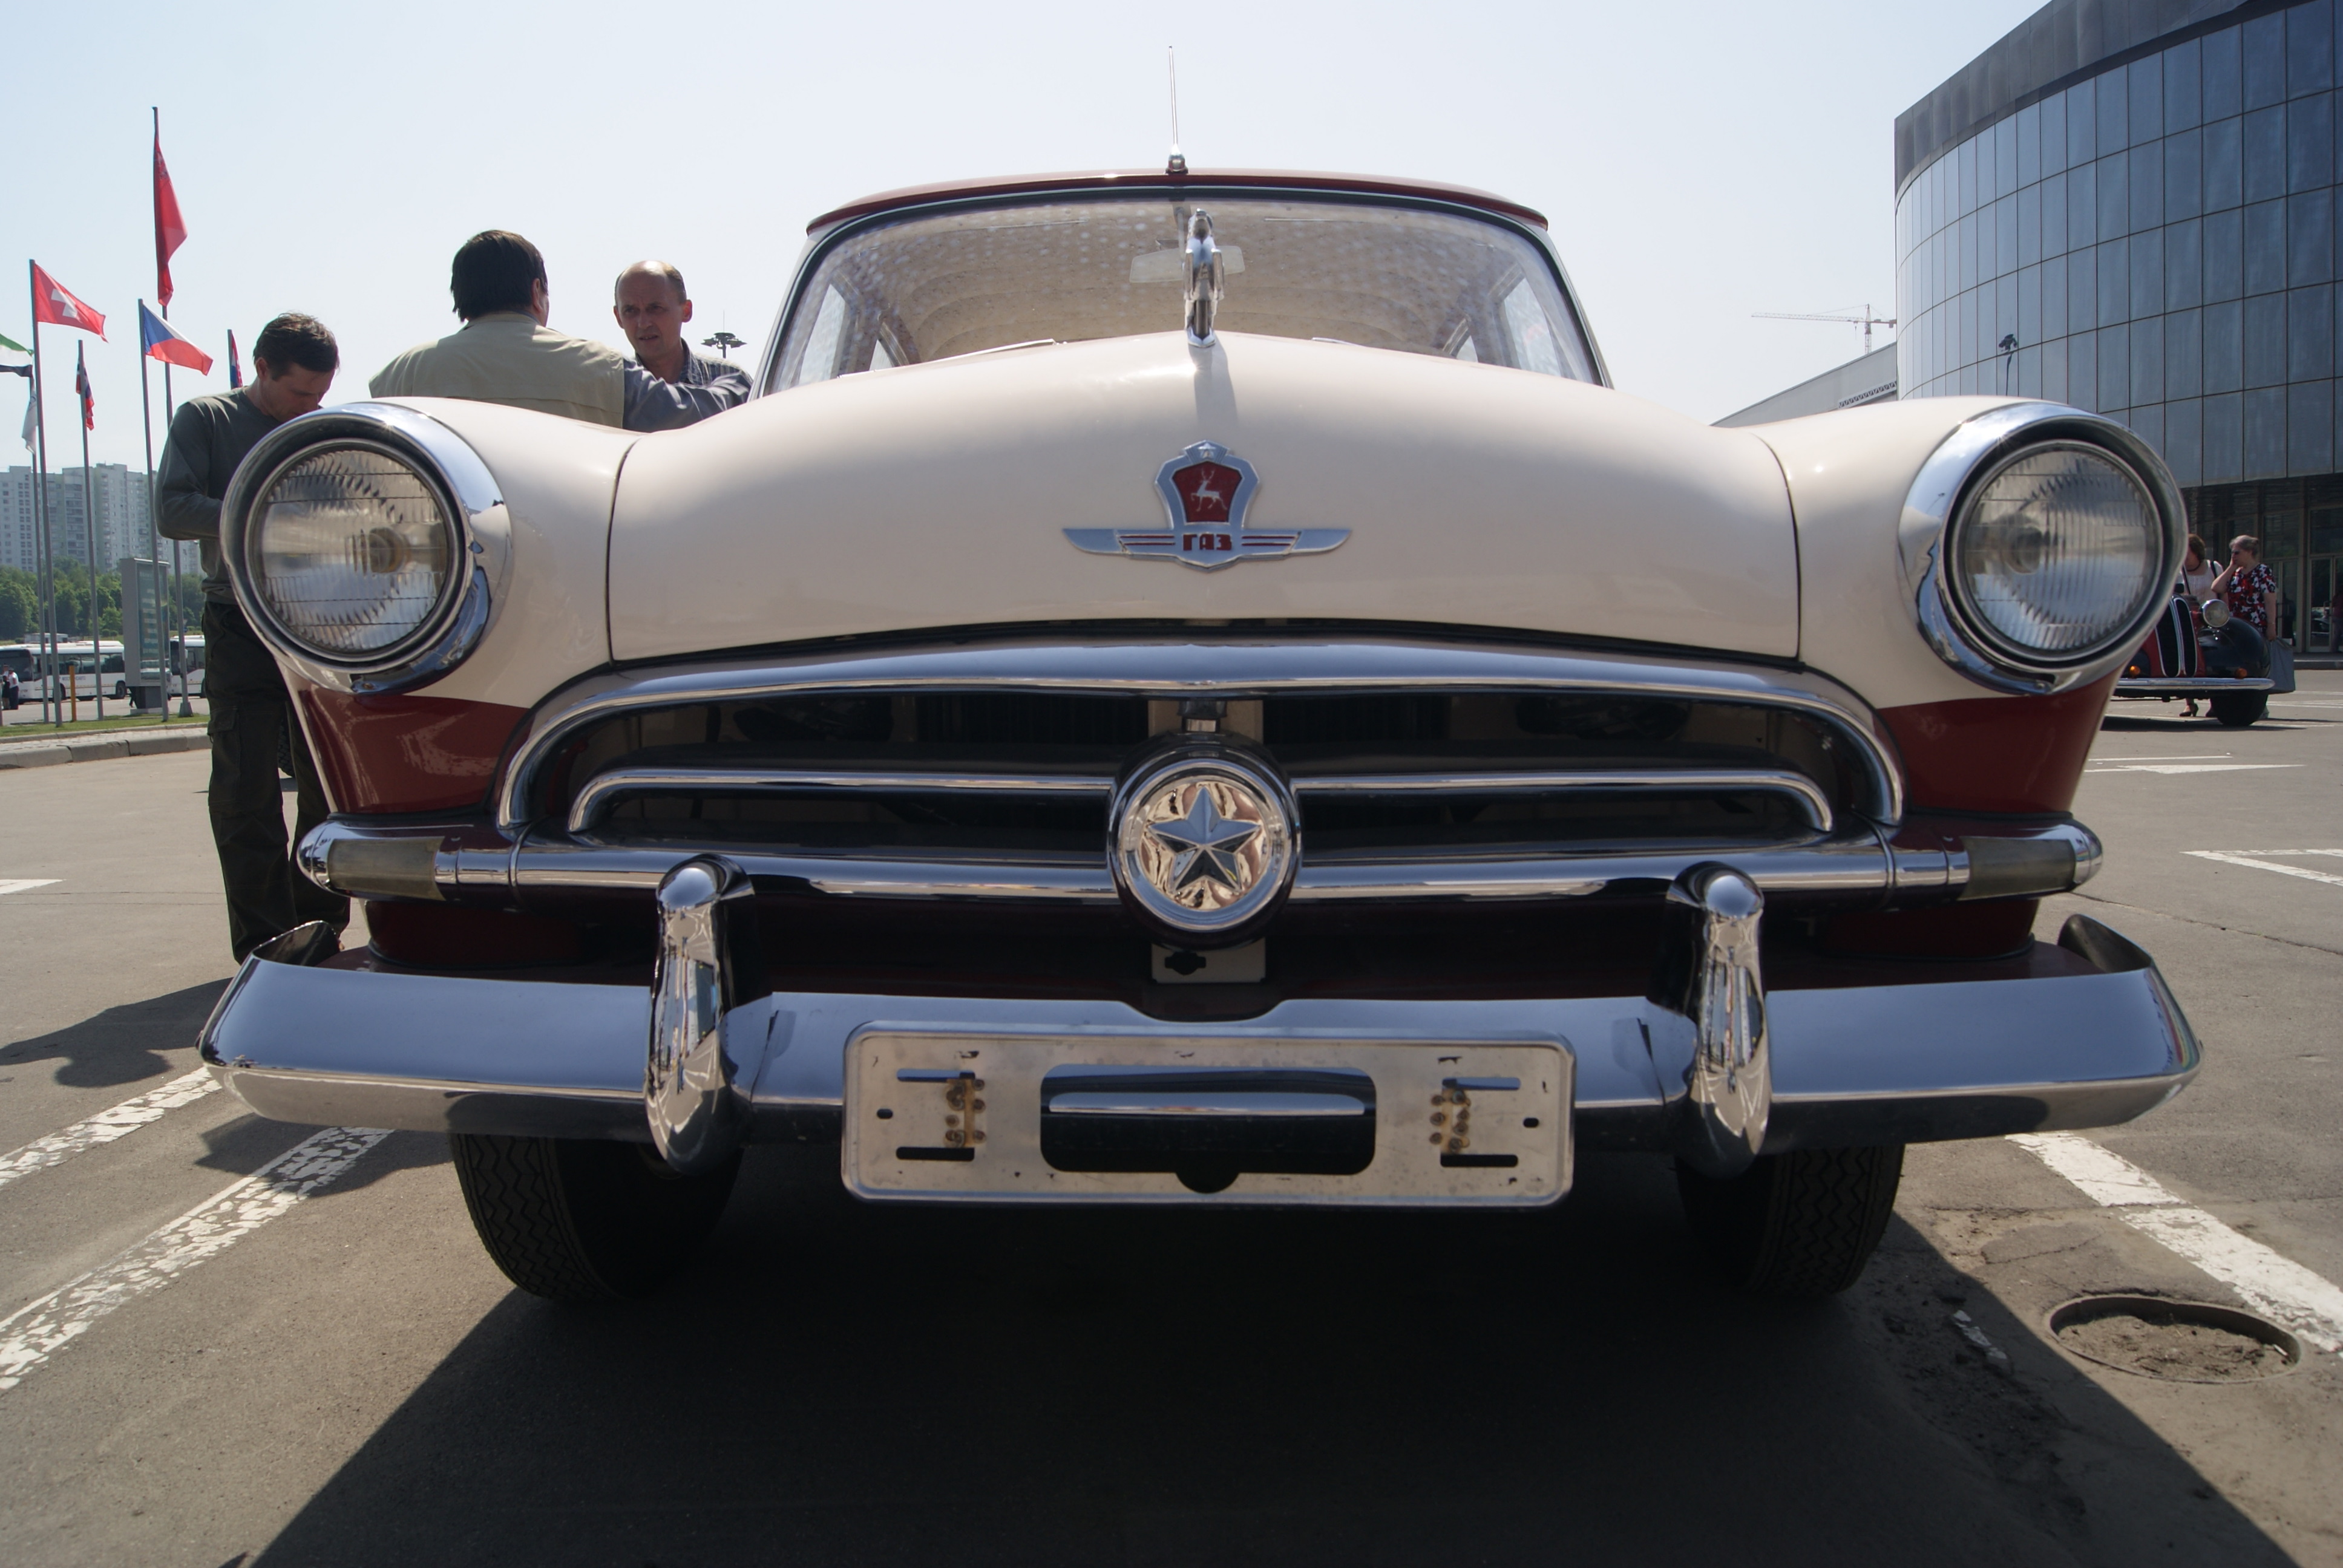 File:GAZ-21 (1st generation) "Volga" in Moscow (front view).jpg ...